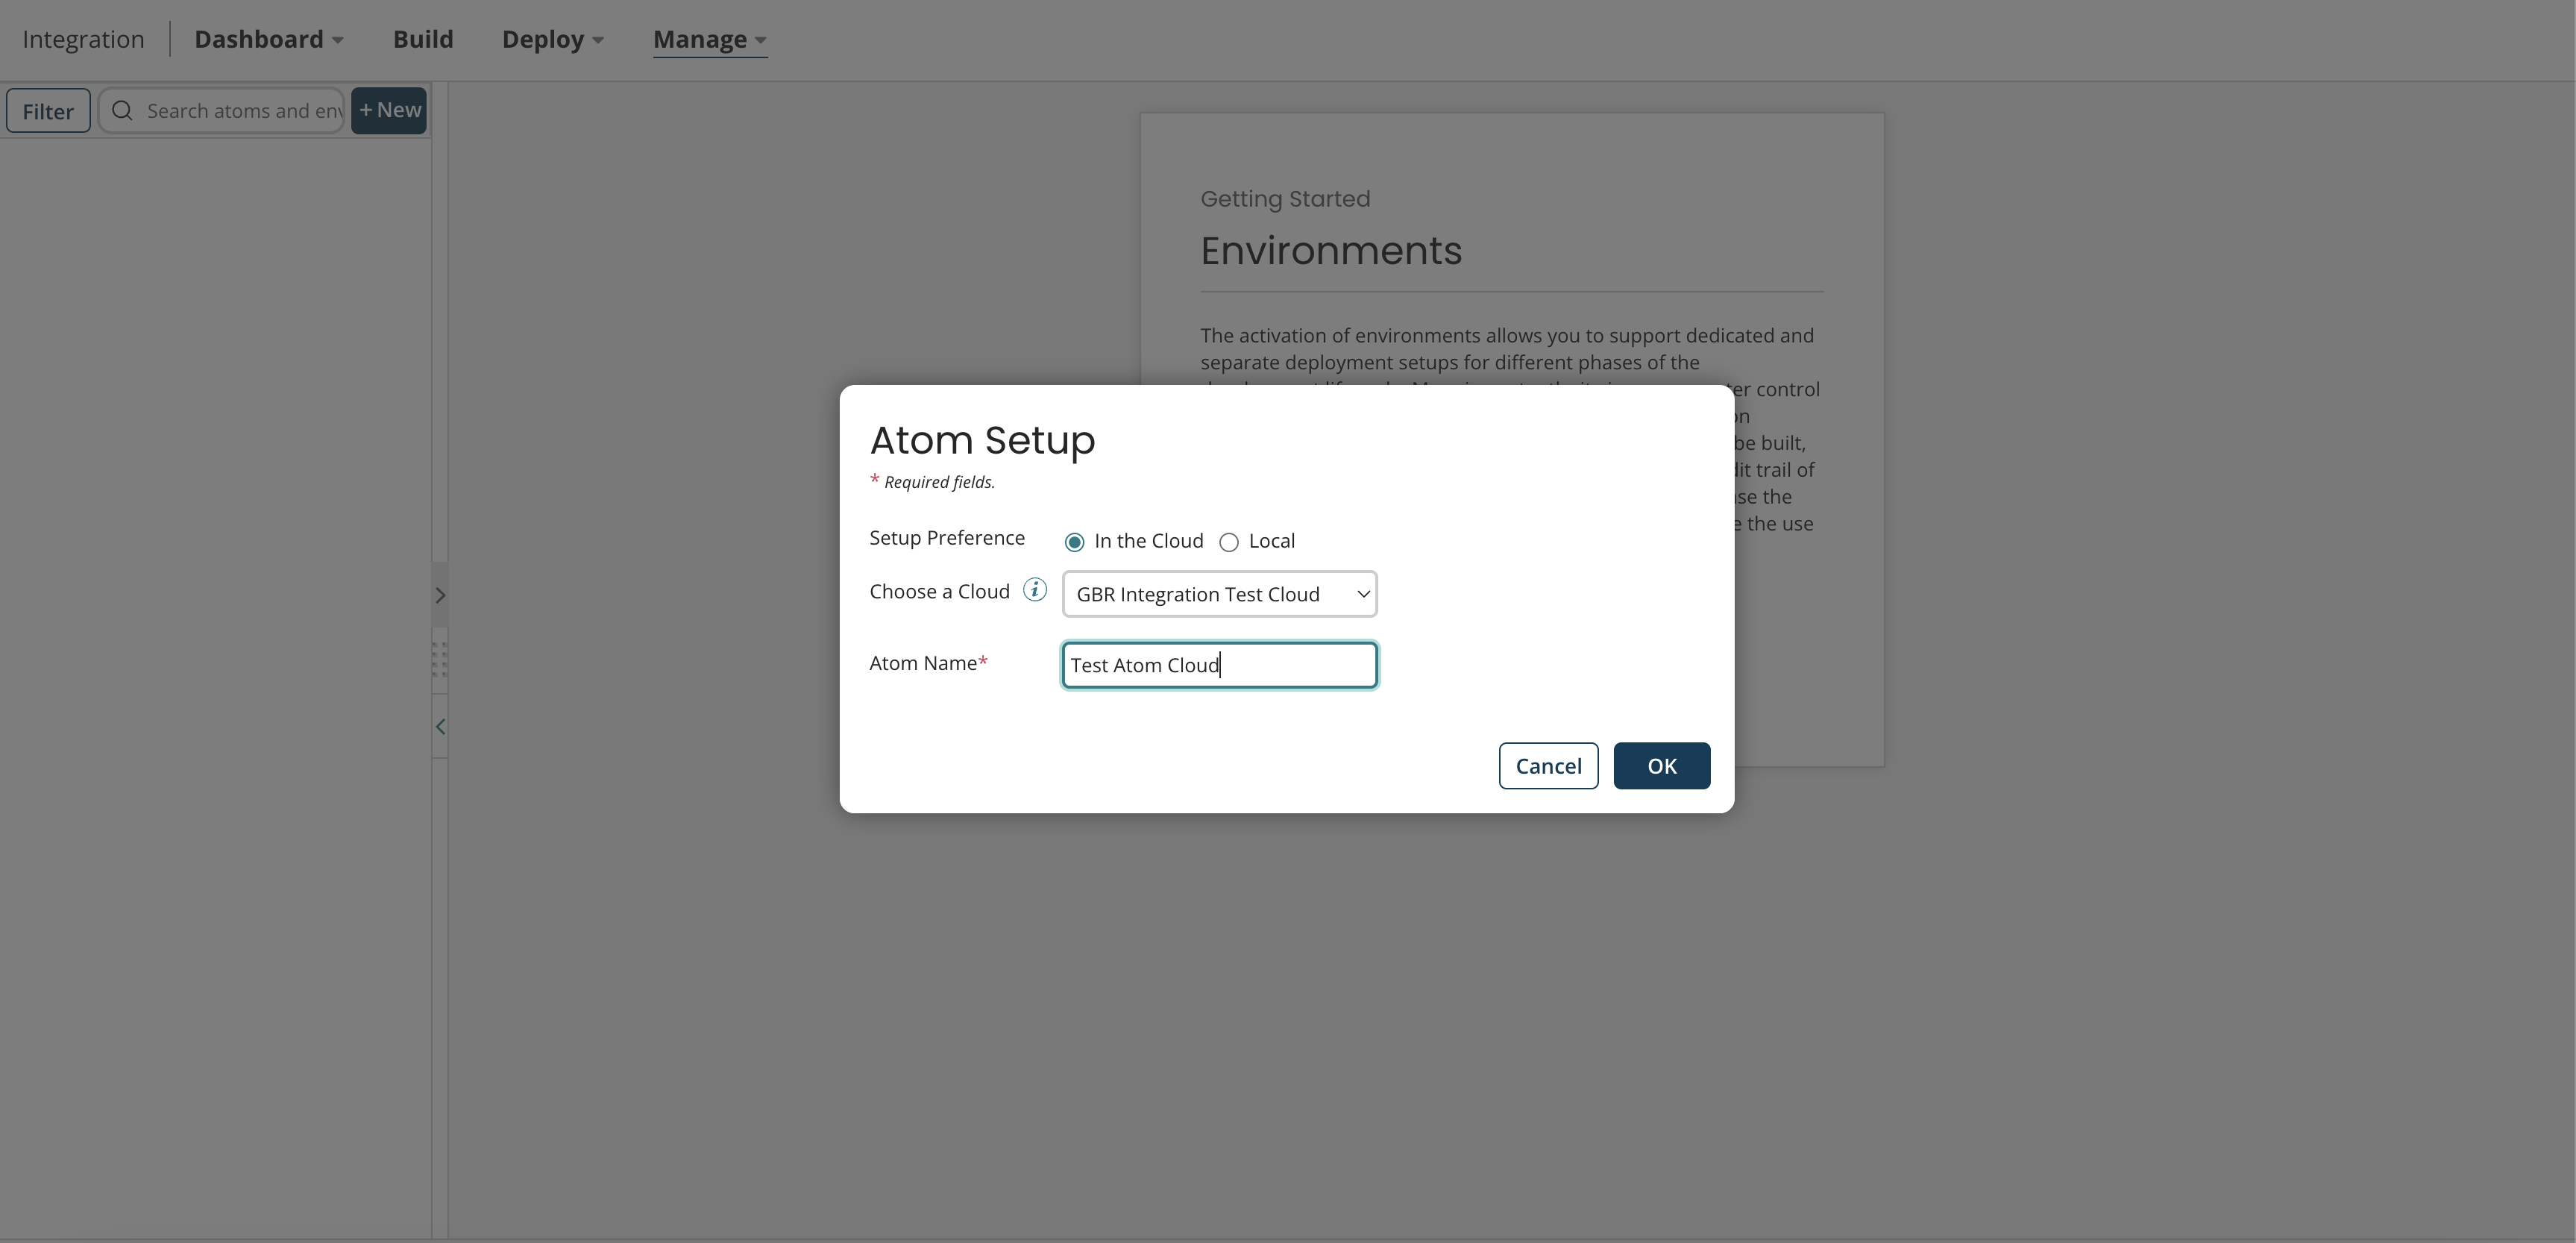 Setting up deployment, choosing Atom type, and naming the Atom